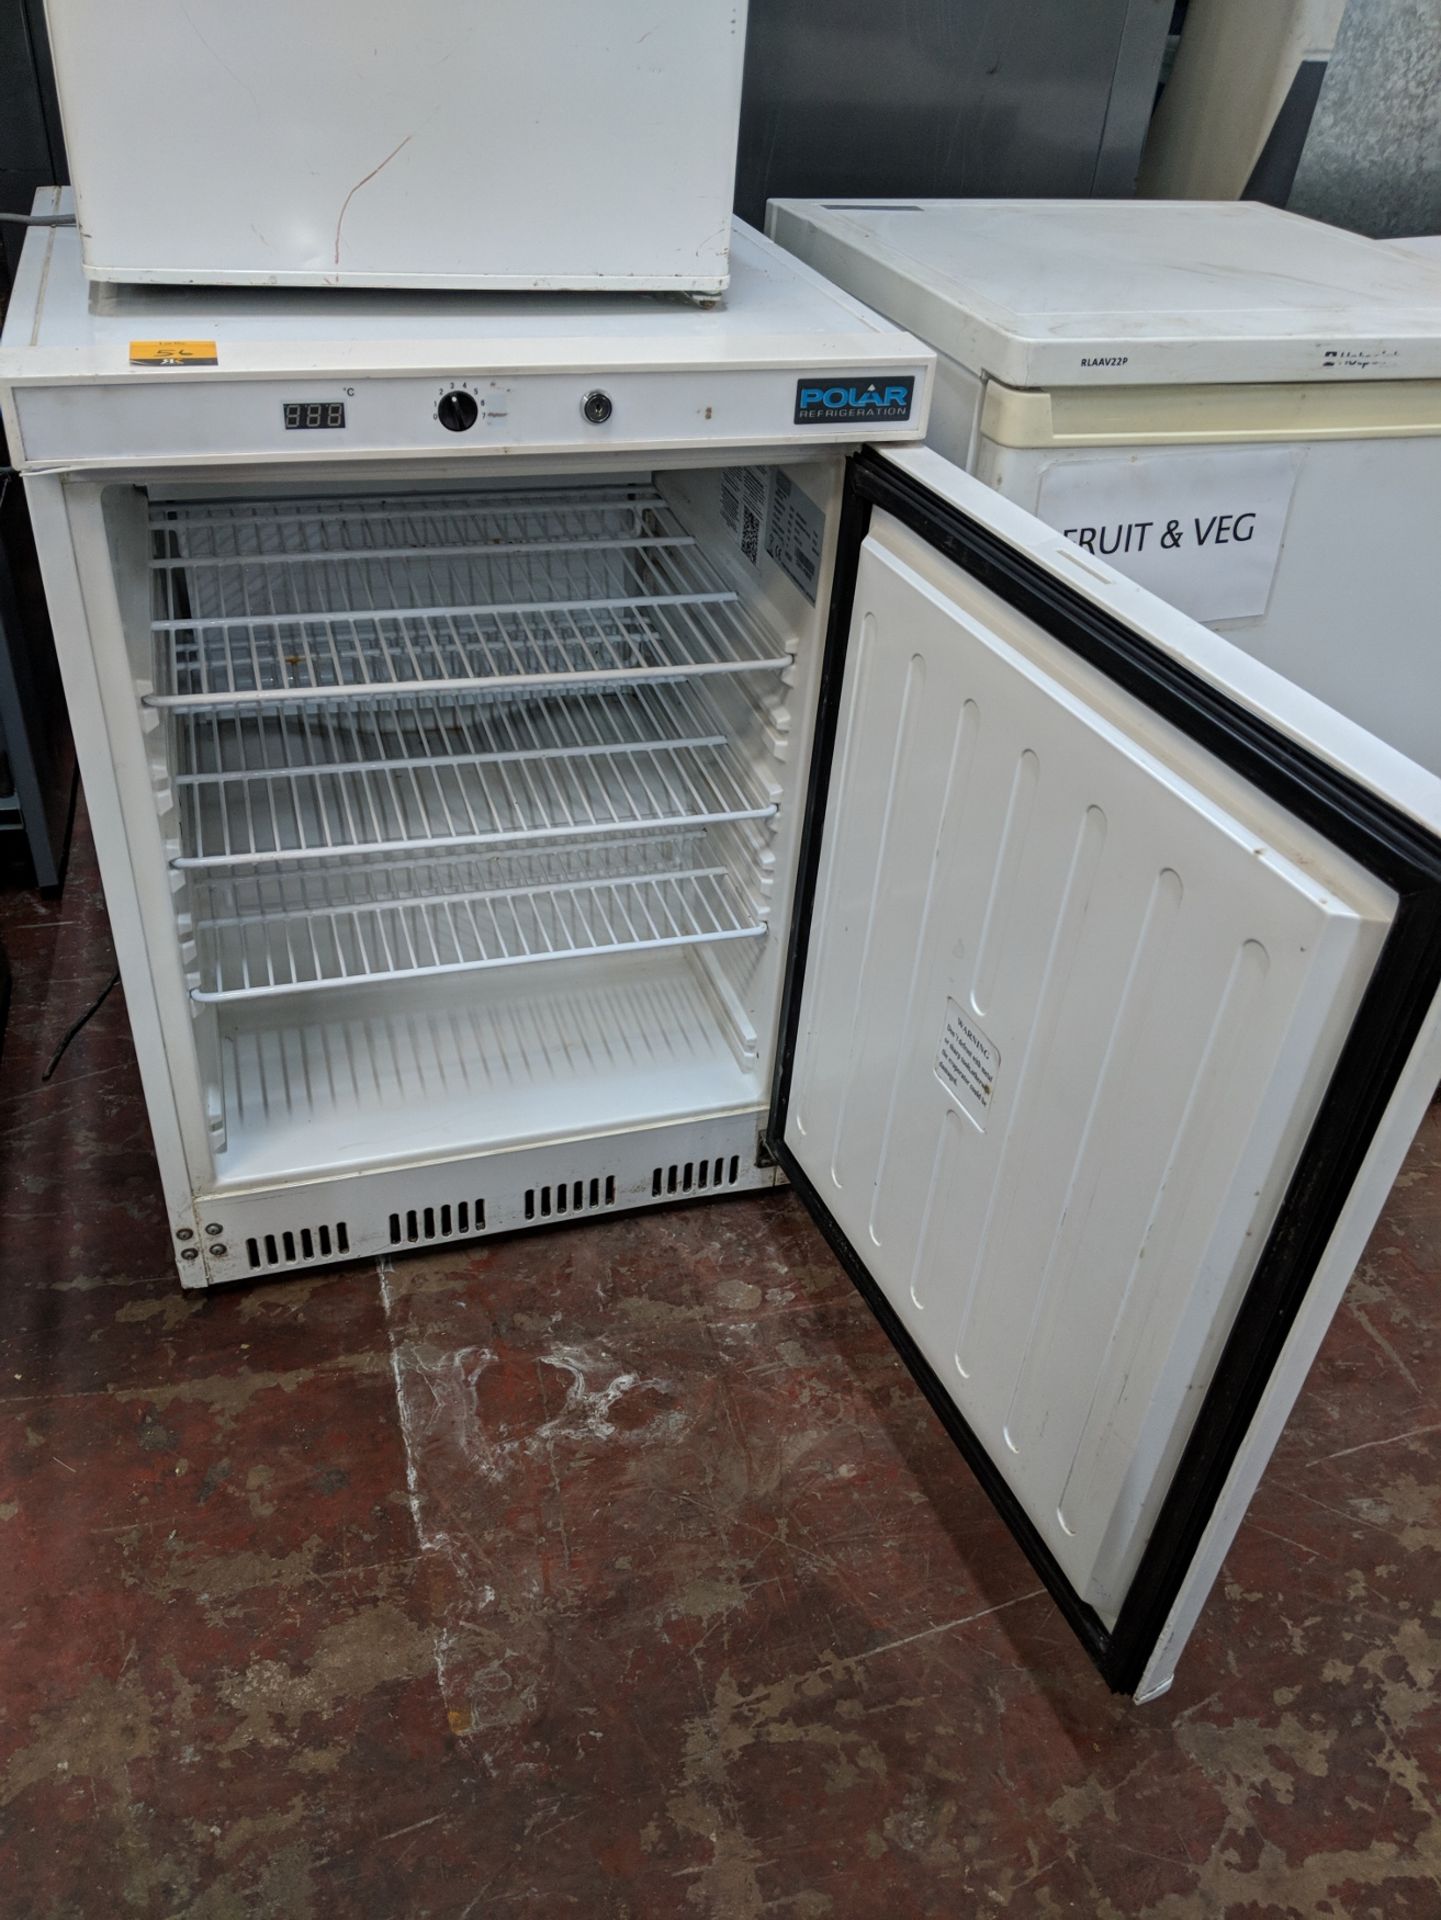 Polar under counter fridge, model CD610 IMPORTANT: Please remember goods successfully bid upon - Image 2 of 3